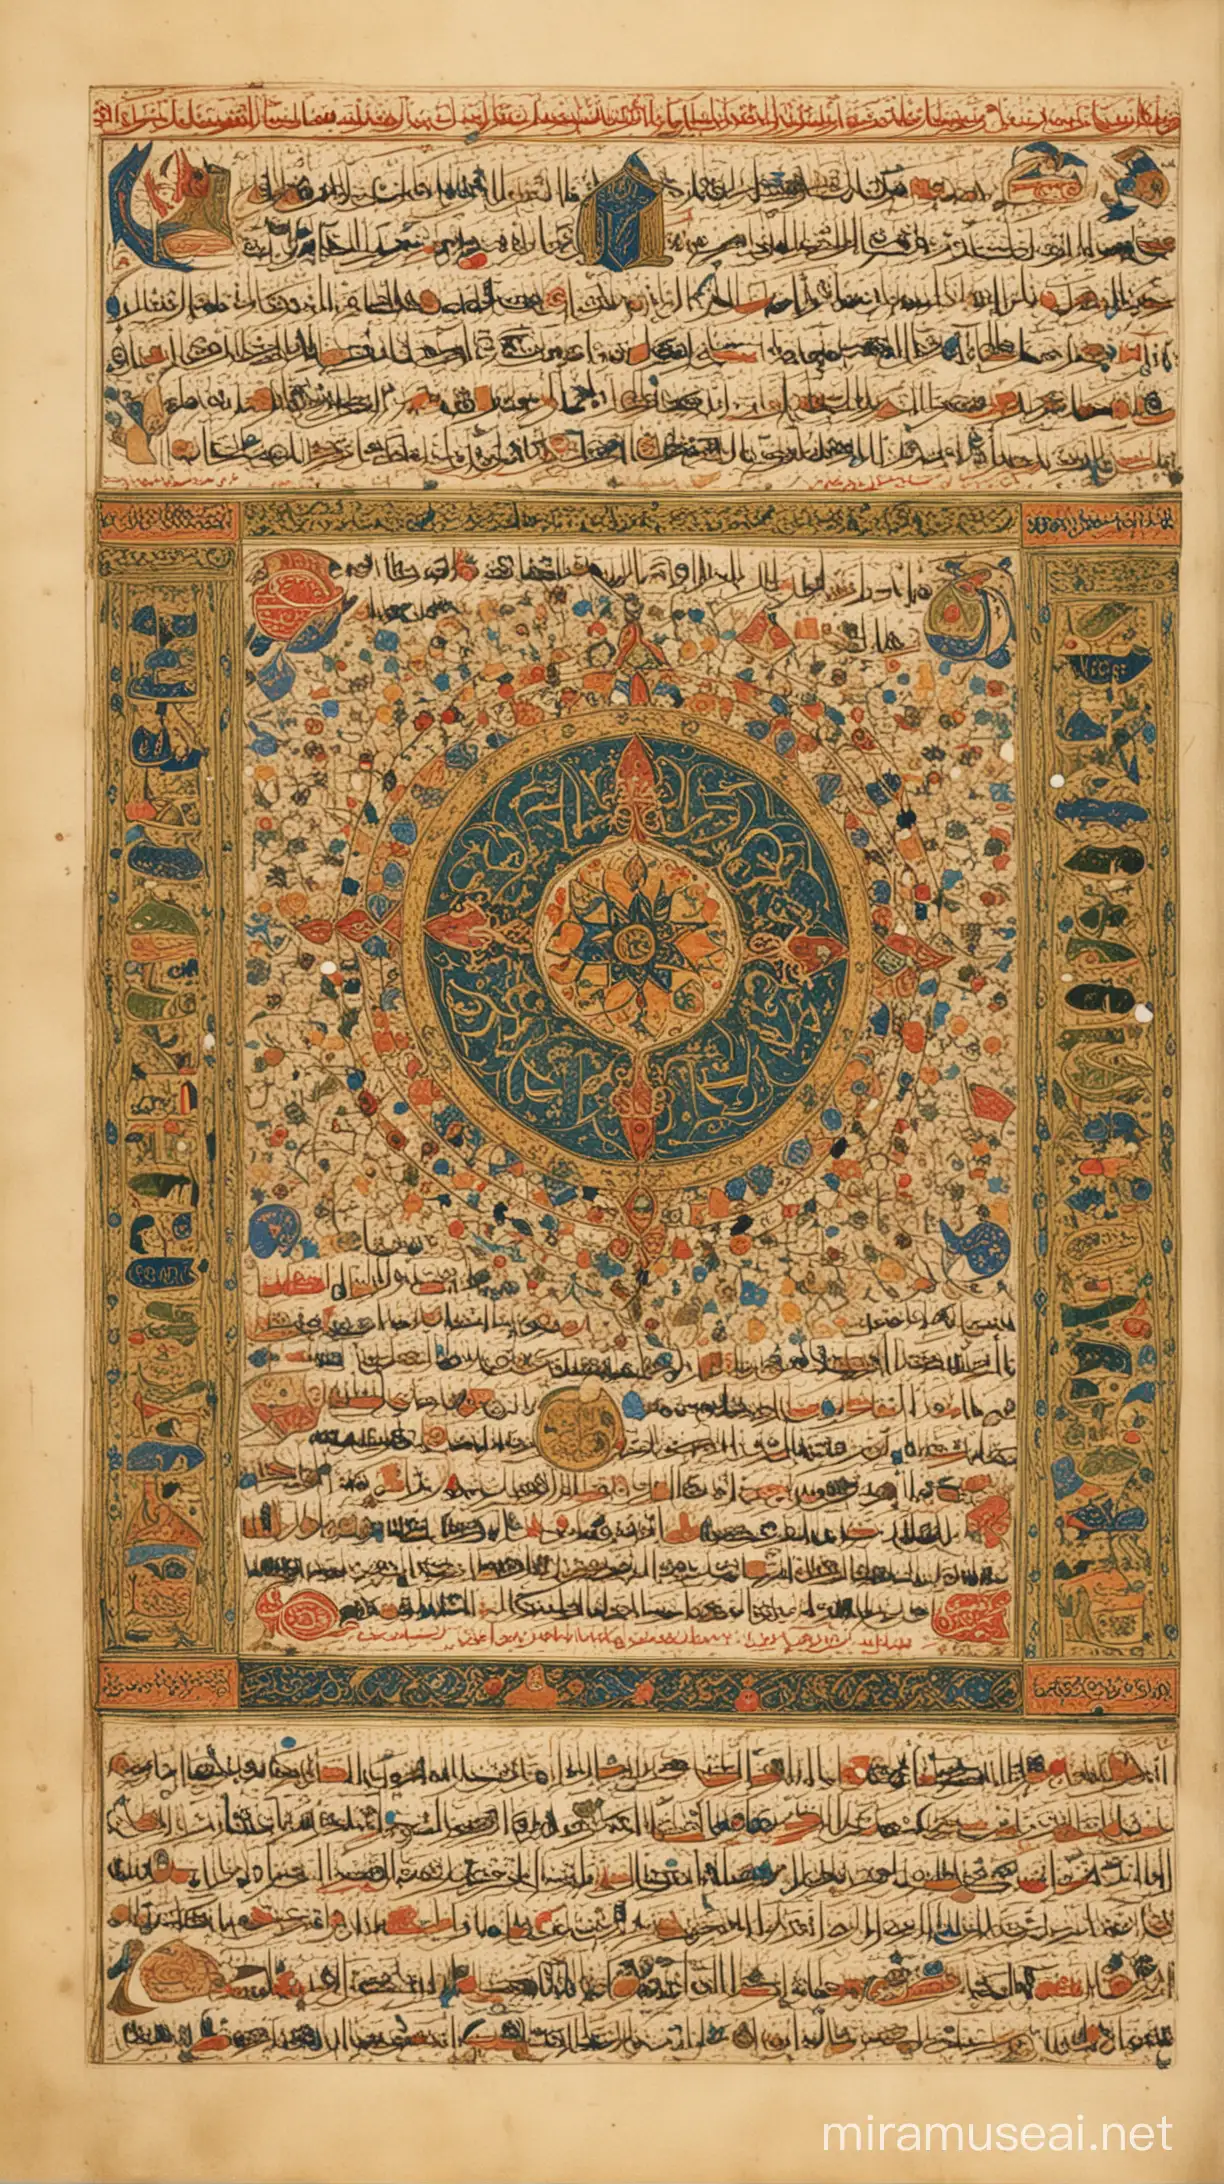 
Image: A medieval Islamic manuscript featuring intricate  and illustrations, symbolizing the rich intellectual heritage of the Golden Age of Islam.